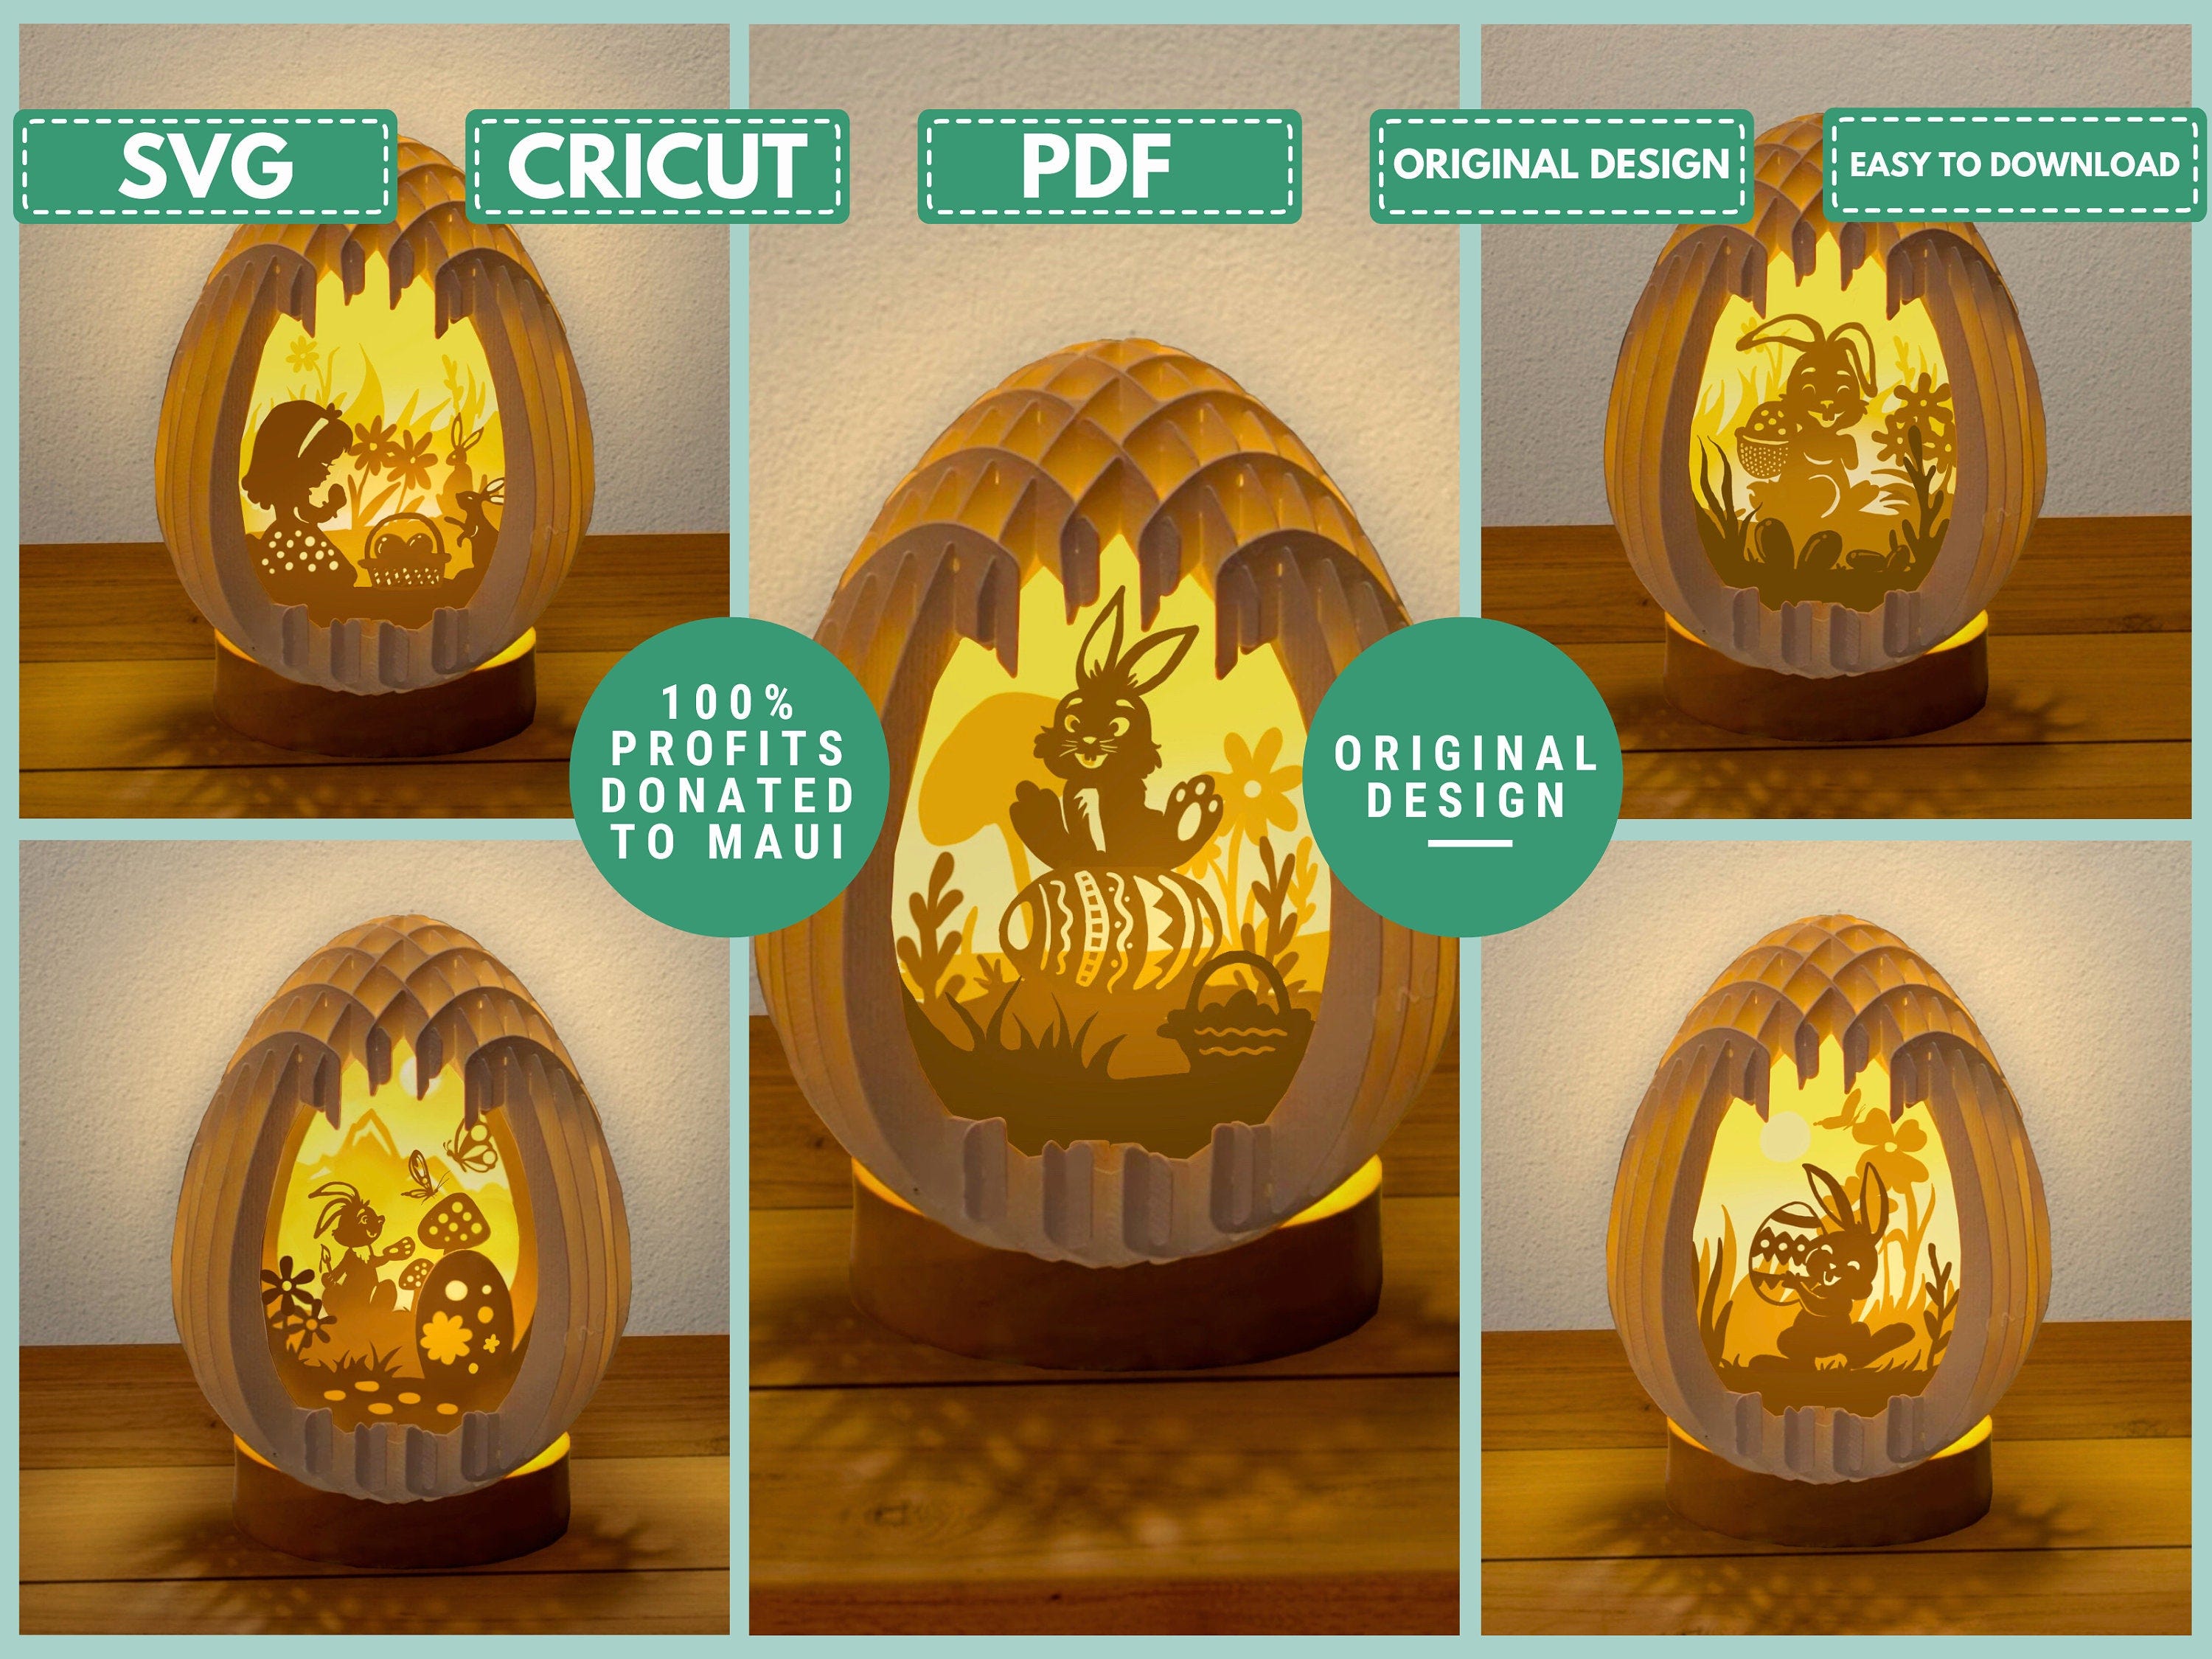 Pack 5 Easter Eggs Pop Up PDF, SVG Light Box for Cricut Projects, Cricut Joy, Cameo4, ScanNcut, Easter Sphere Popup, DIY Lantern with Rabbit